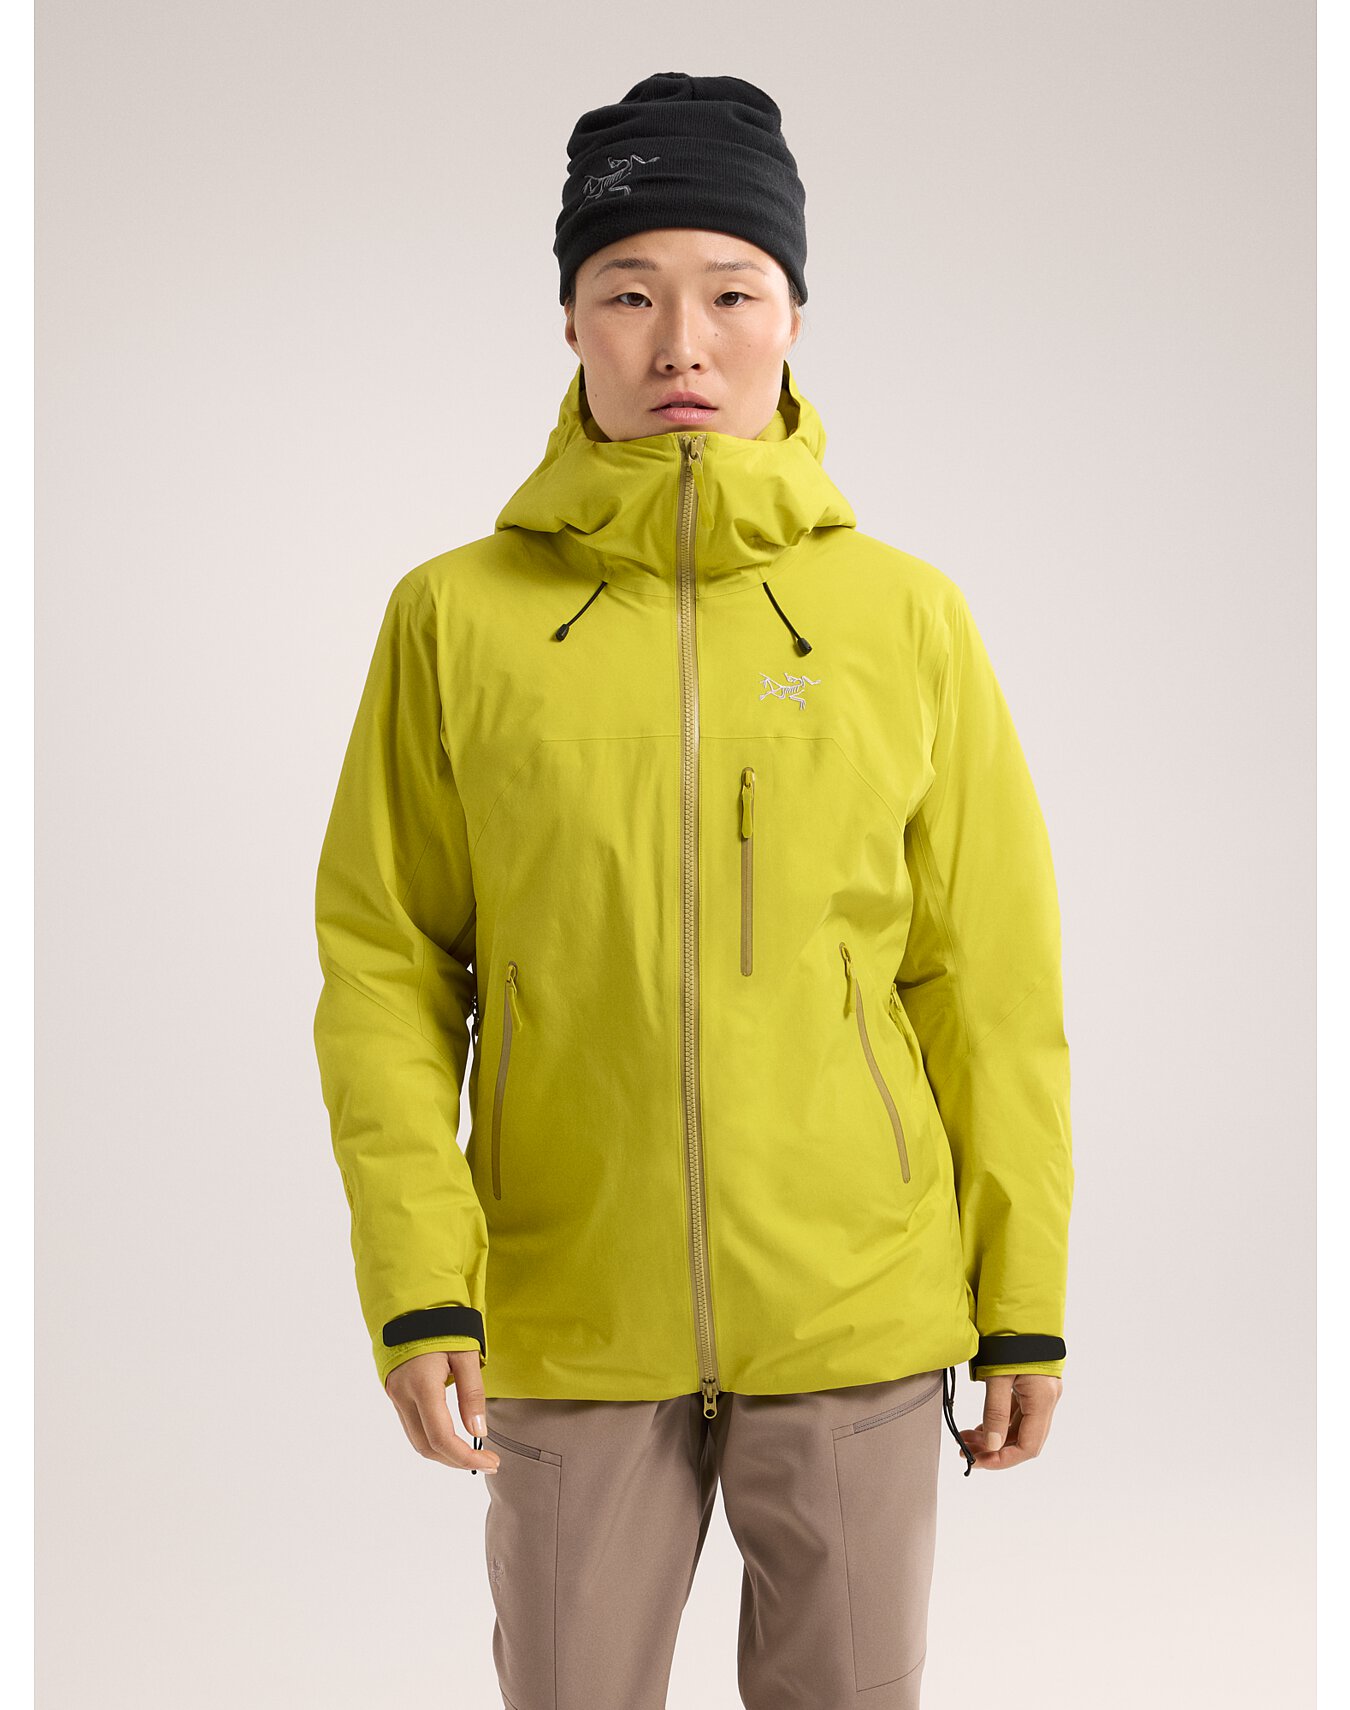 Beta Insulated Jacket Women's | Arc'teryx Outlet